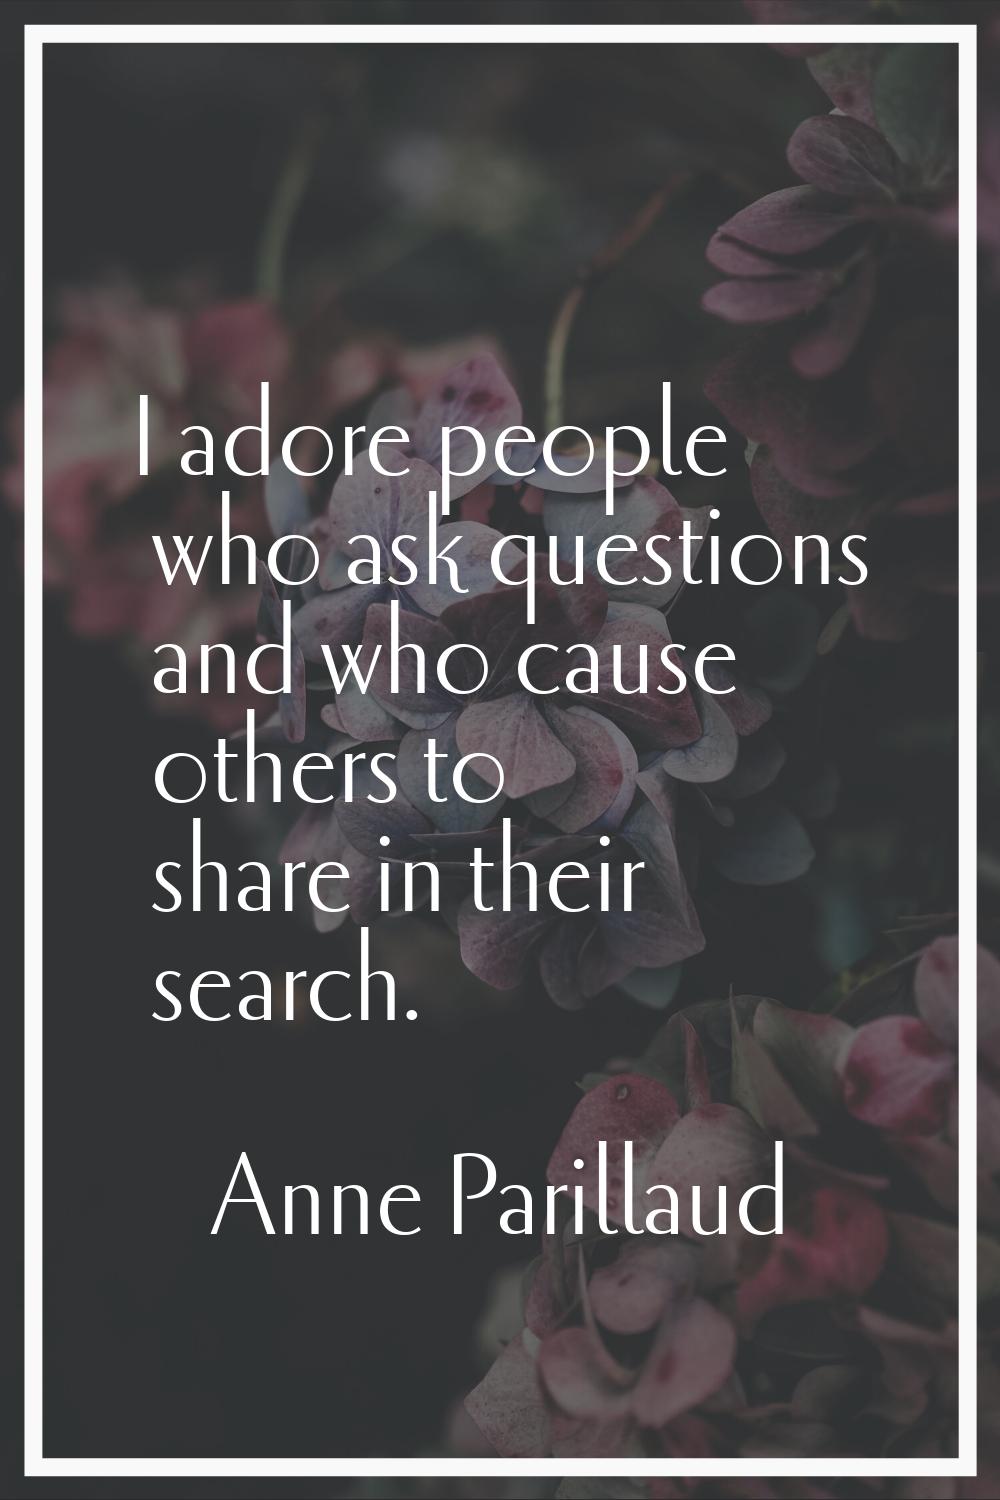 I adore people who ask questions and who cause others to share in their search.